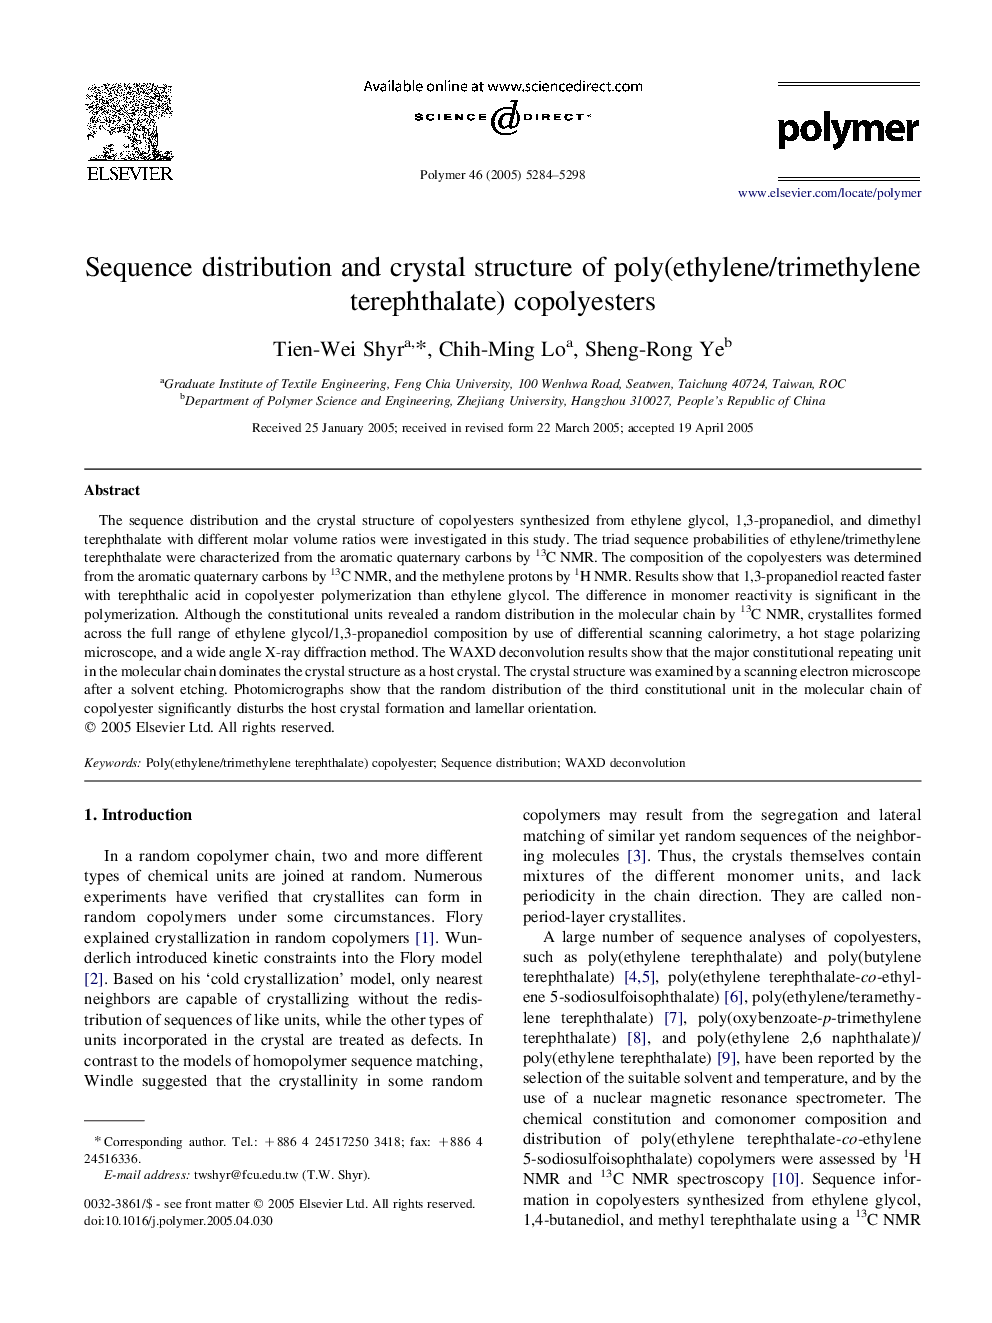 Sequence distribution and crystal structure of poly(ethylene/trimethylene terephthalate) copolyesters